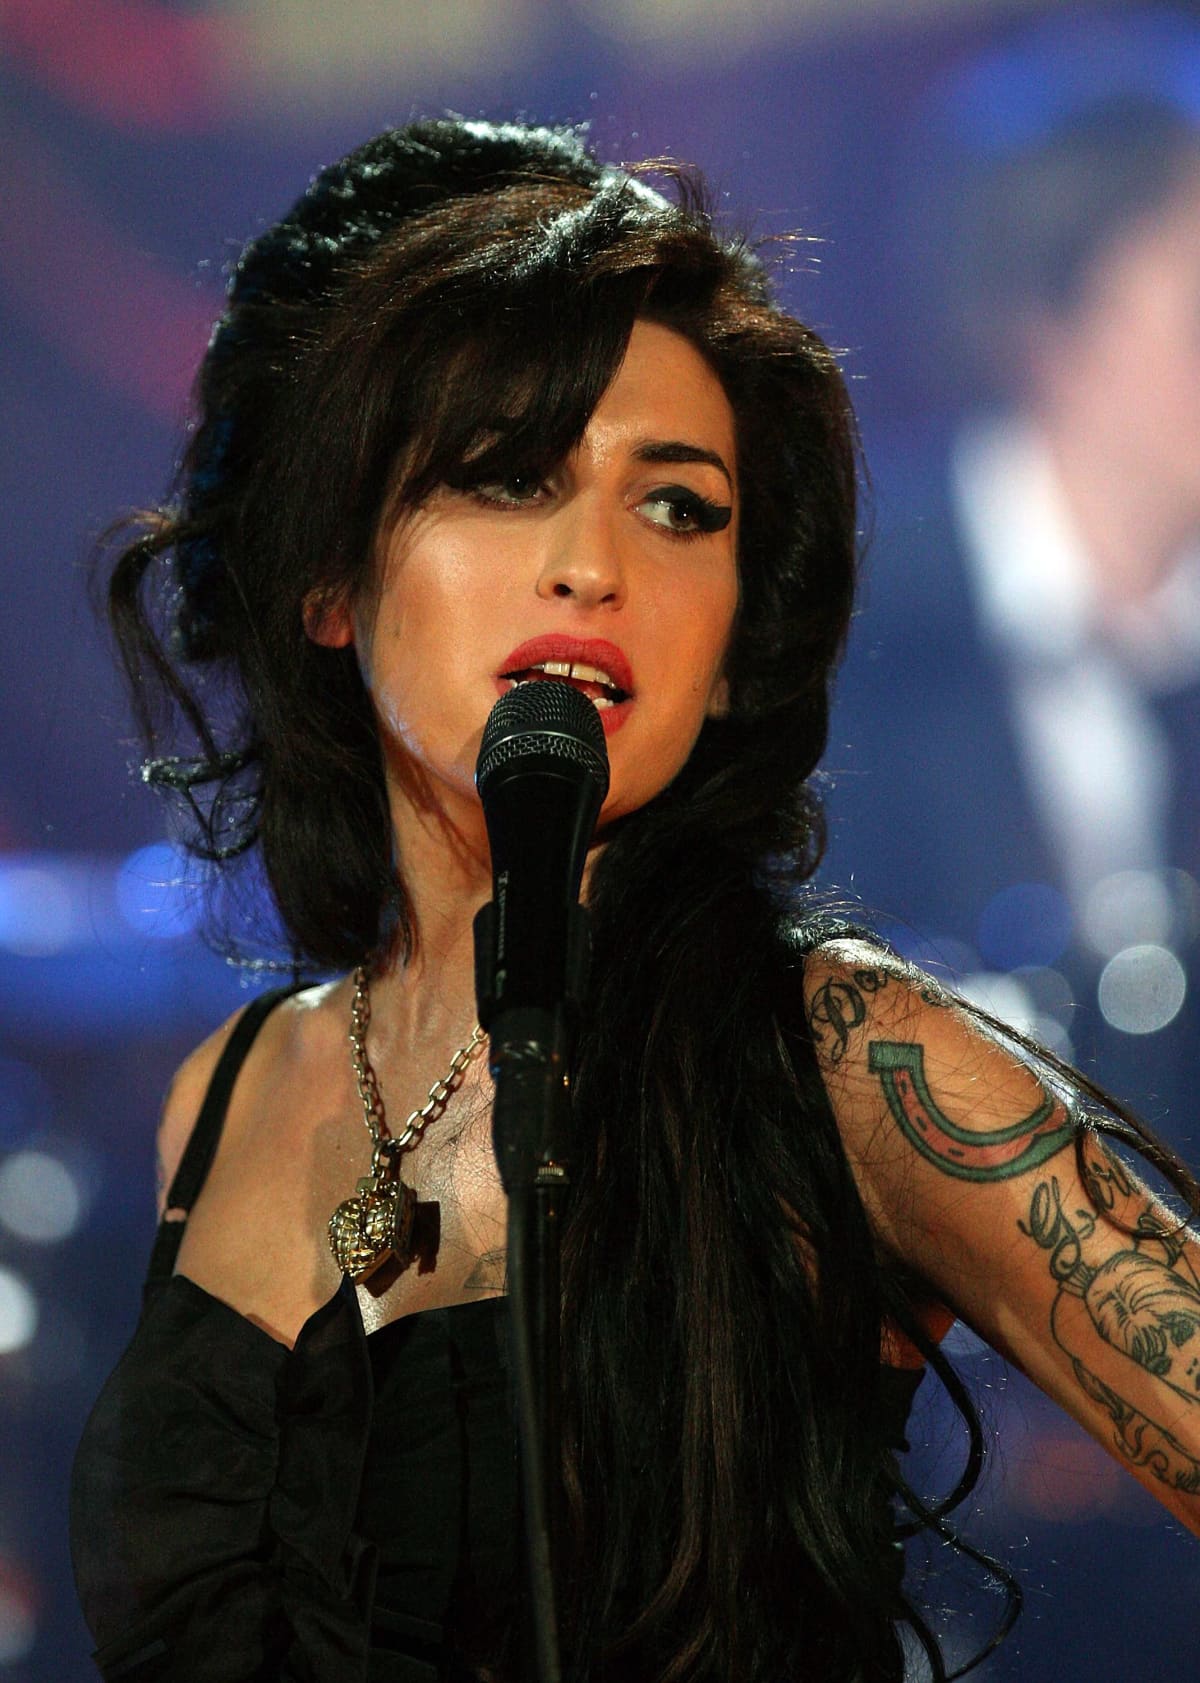 Amy Winehouse singing on stage